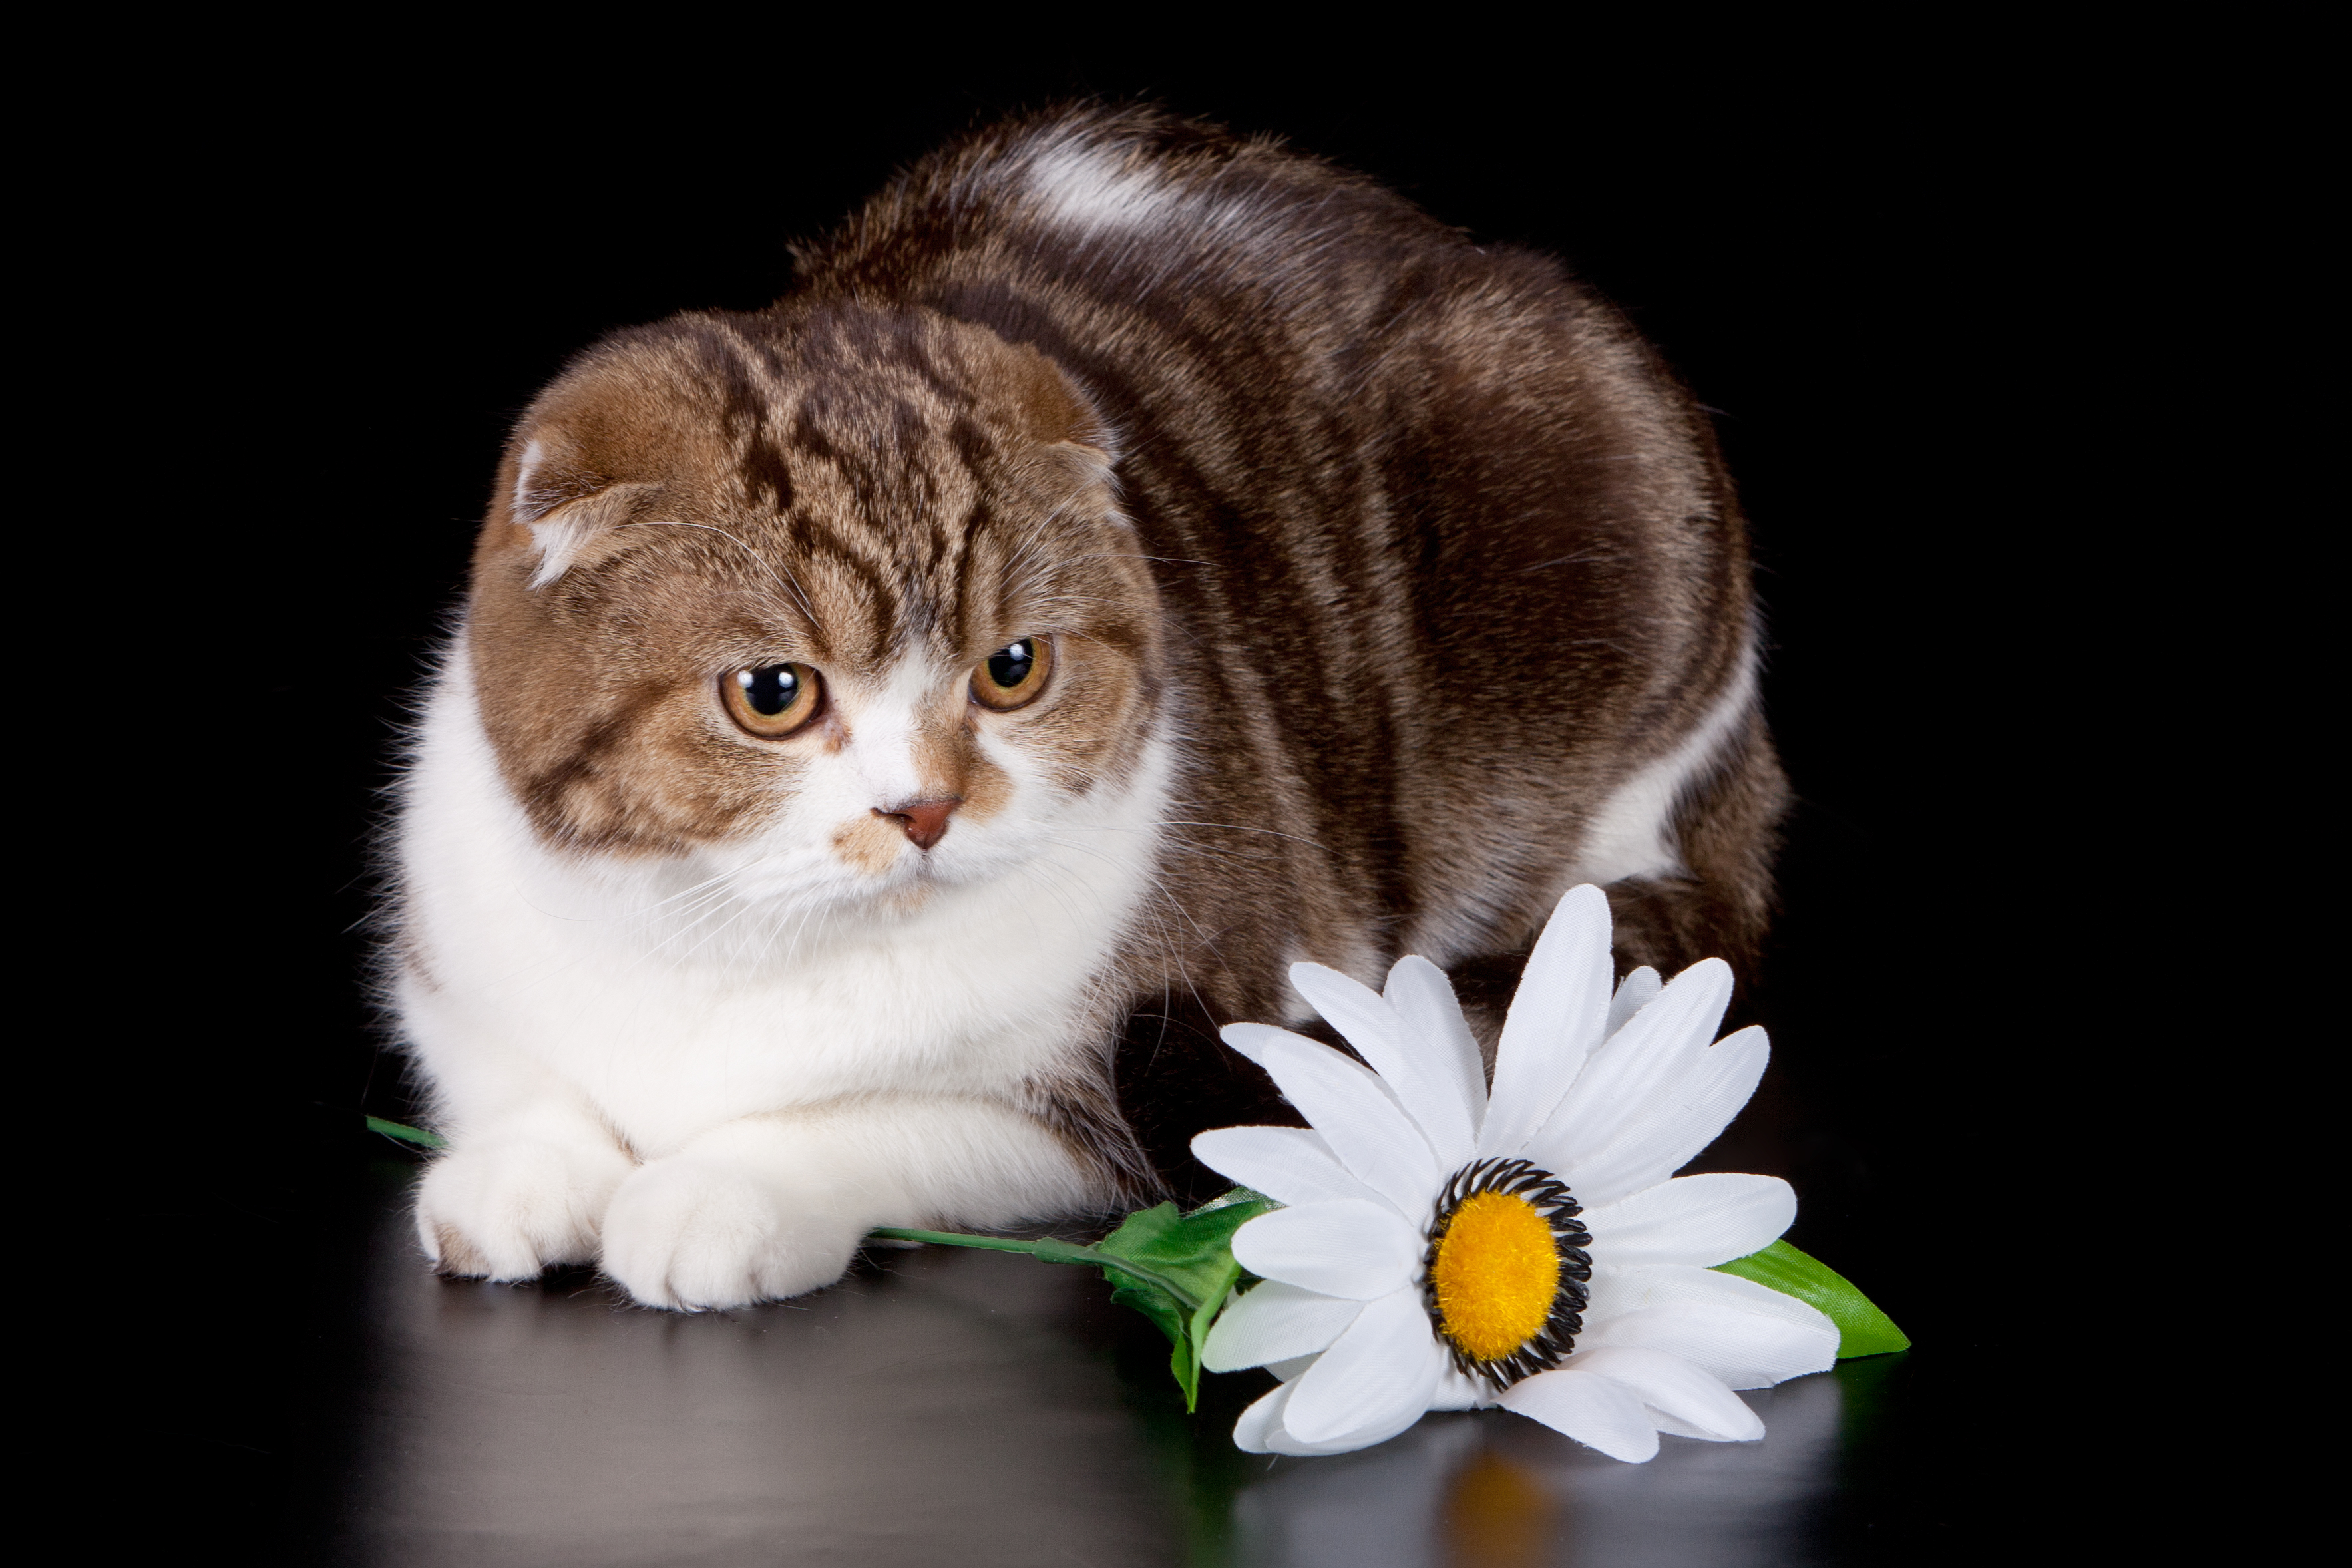 animals, usa, 2014, united states, october, national cat day